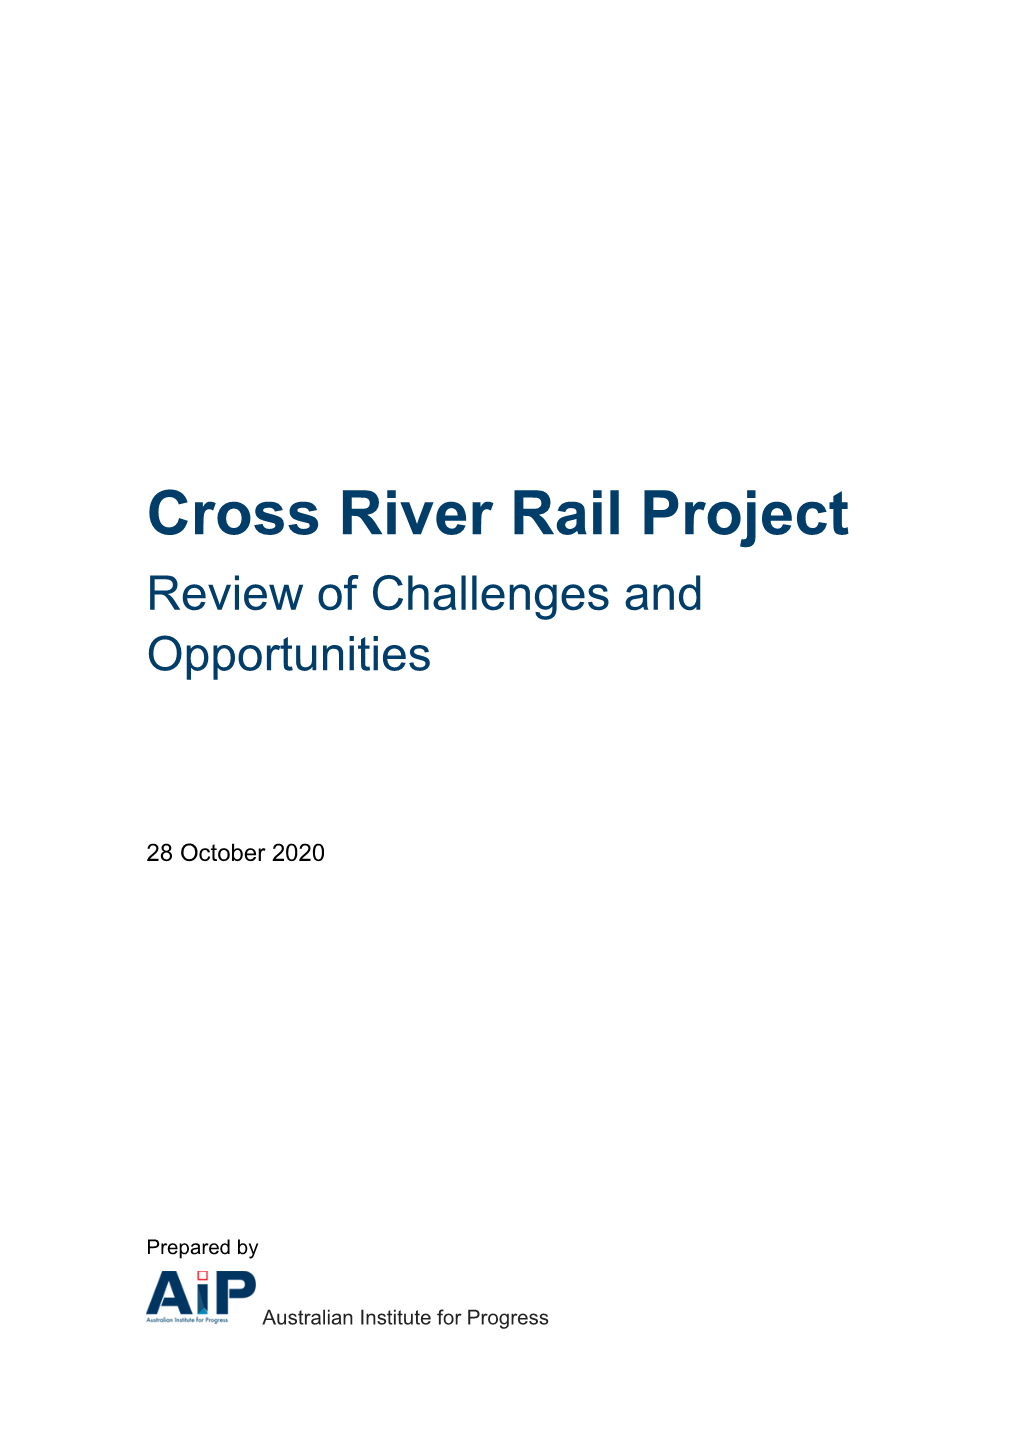 Cross River Rail Project Review of Challenges and Opportunities